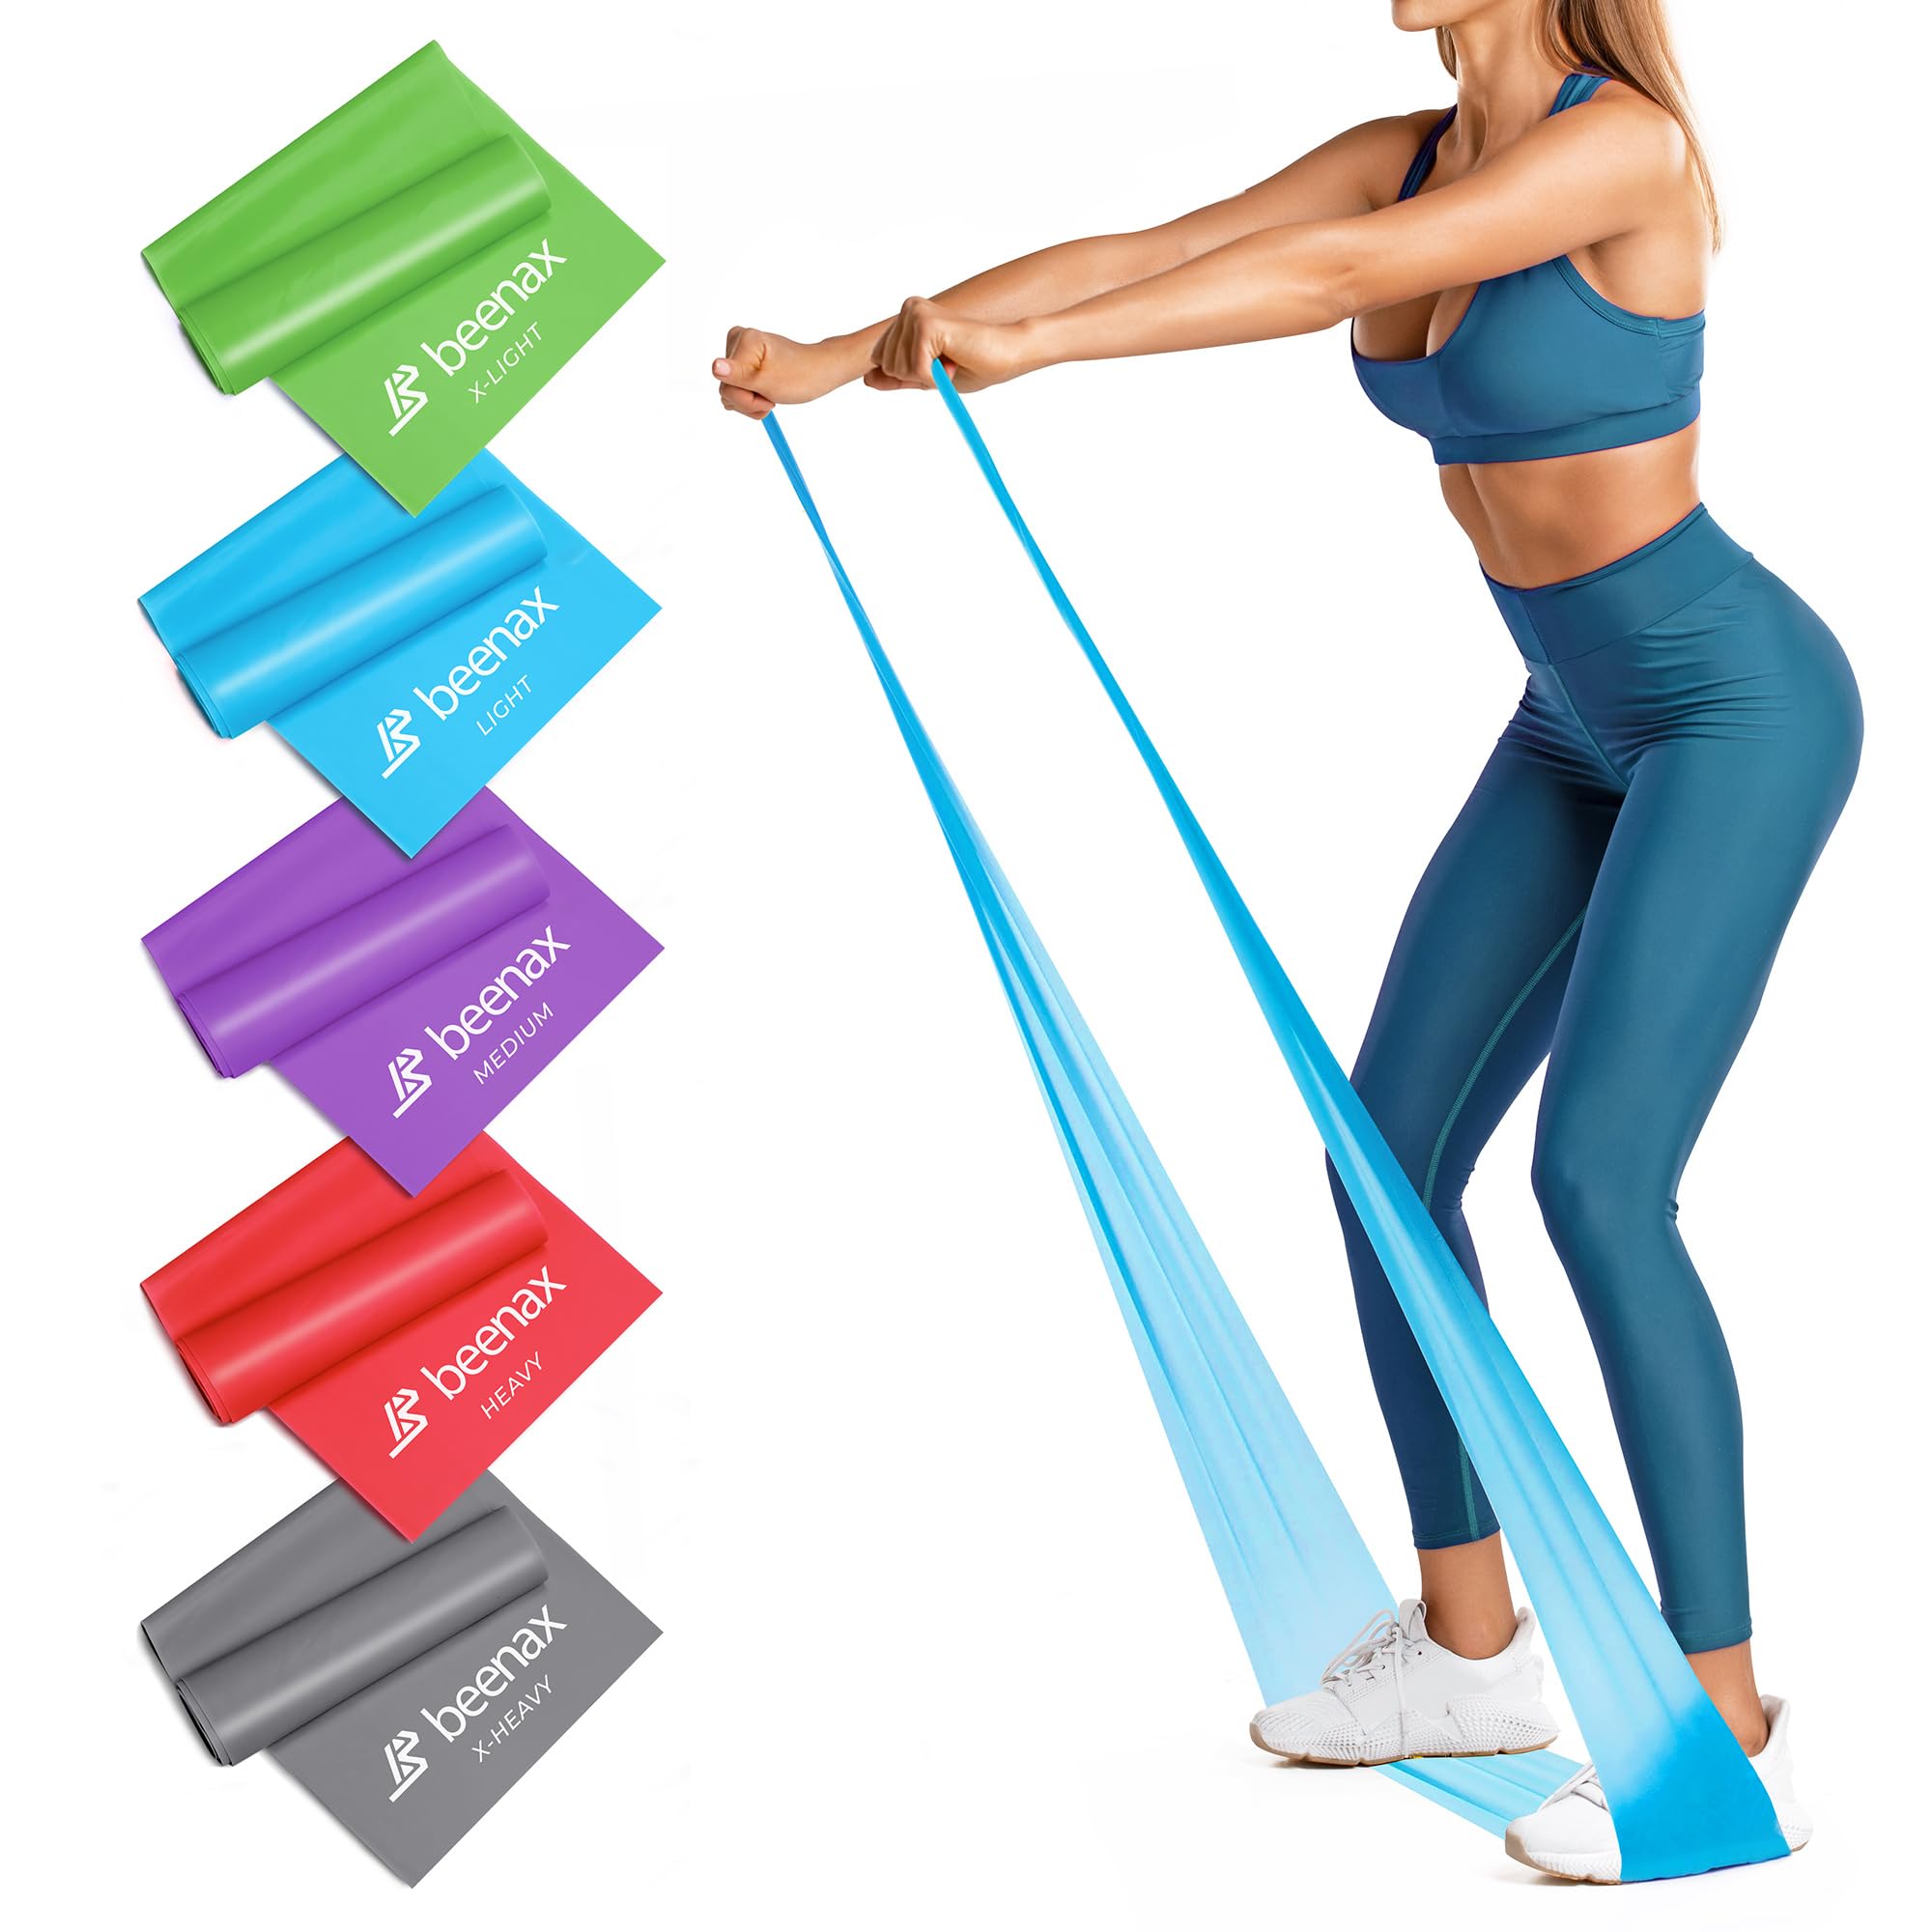 Beenax Resistance Bands - Exercise Bands to Build Muscle Flexibility  Strength for Pilates Yoga Rehab Stretching Fitness Gym Physio Strength  Training and Workout - Men & Women 7. Set of 5